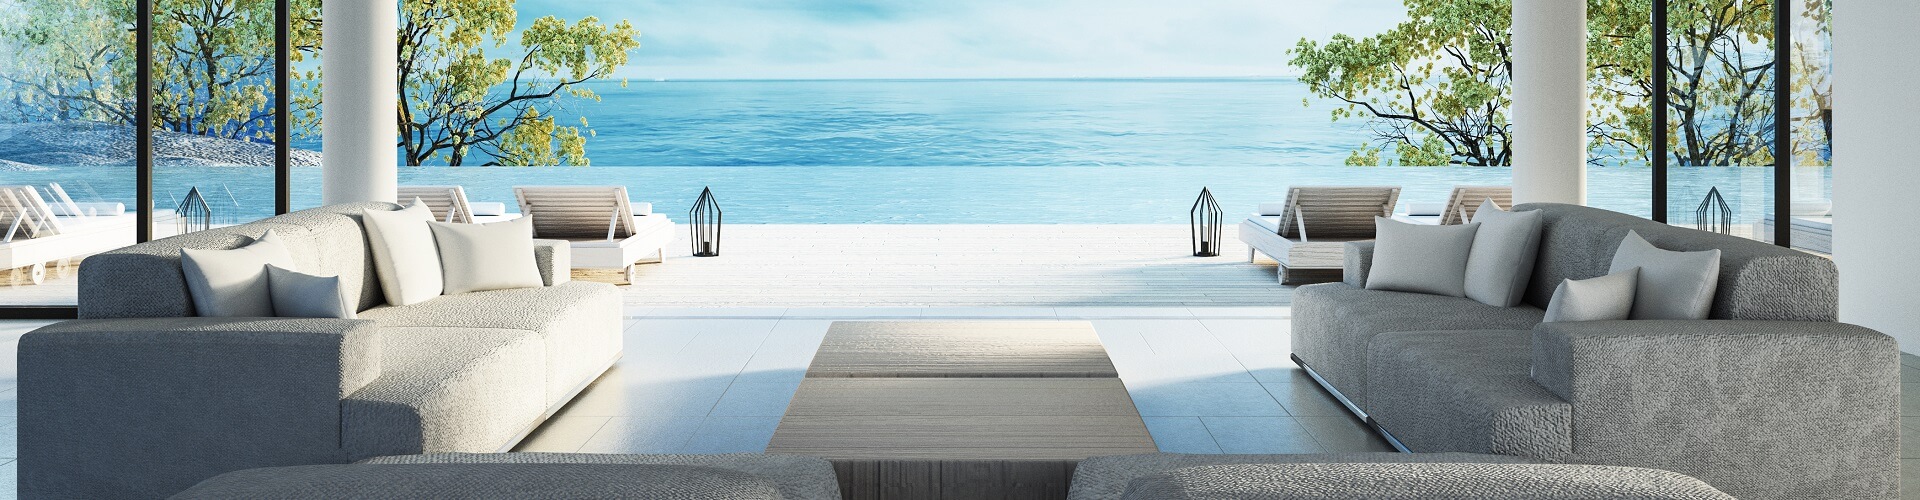 Sofas with cushions and a table in front of the sea